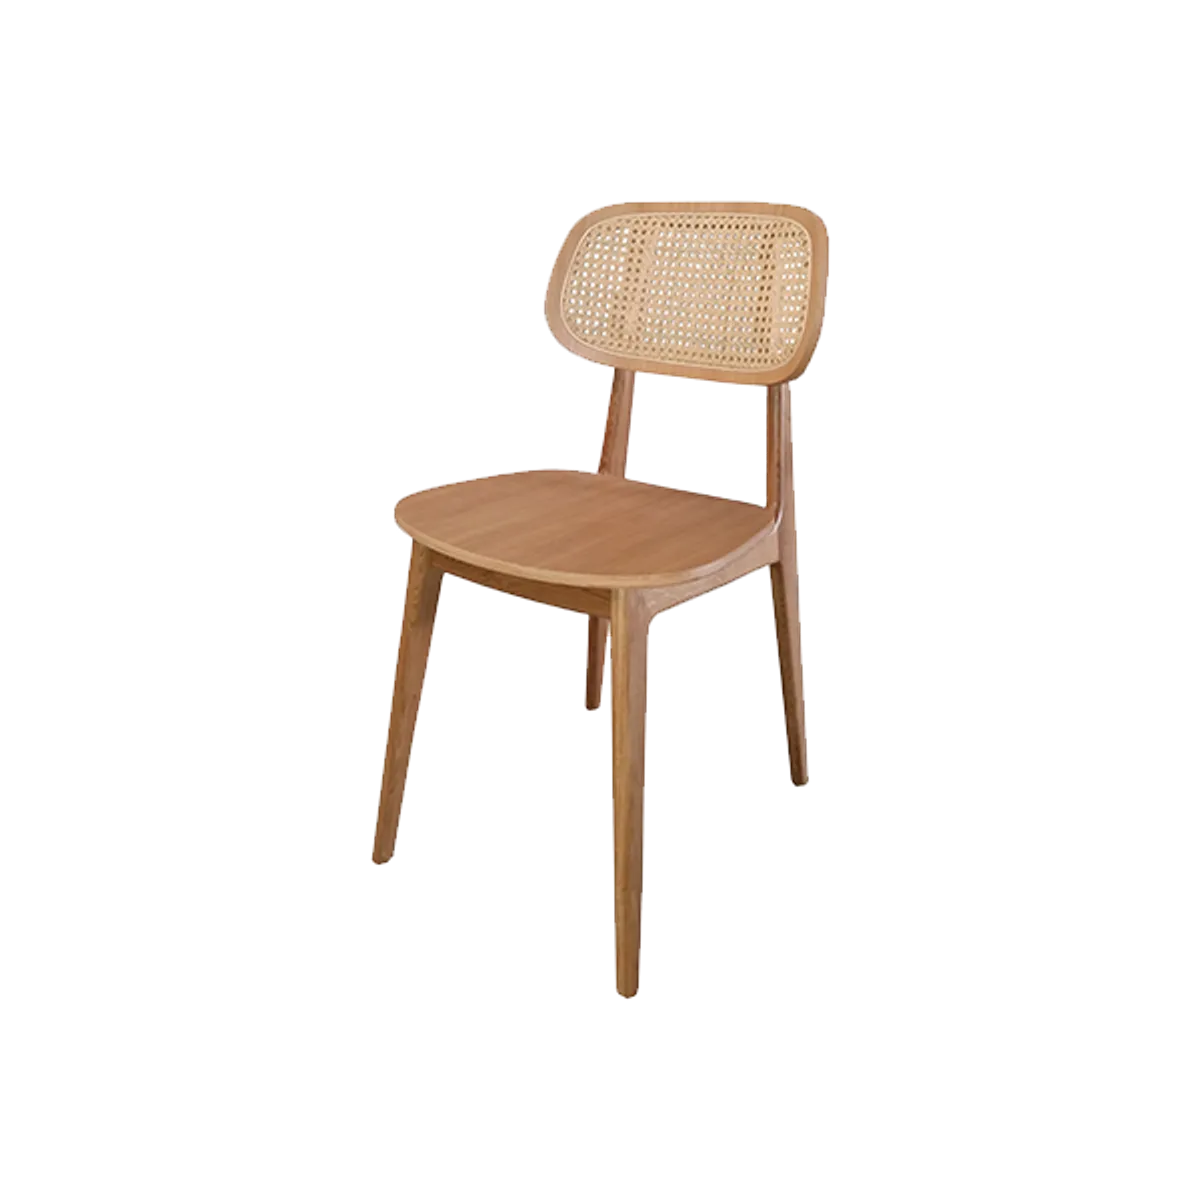 Moby Cane Chair Beech Inside Out Contracts Web